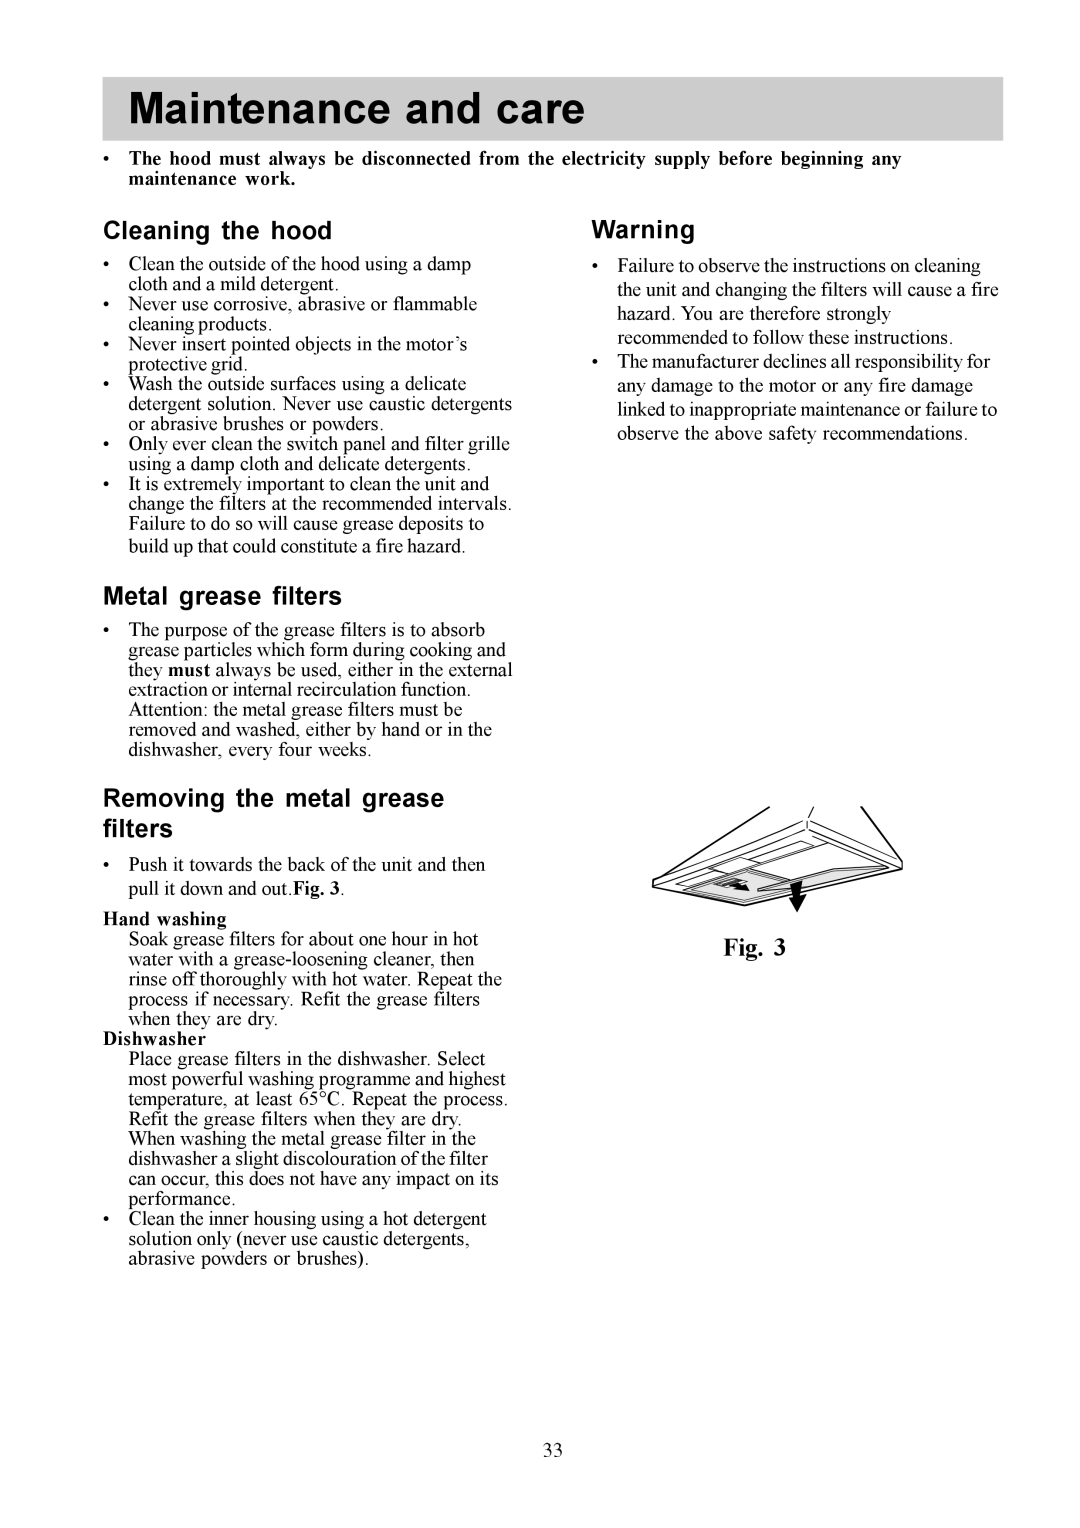 Electrolux EFC 650-950-640, CH 1200-900-600 user manual Maintenance and care, Cleaning the hood, Metal grease filters 